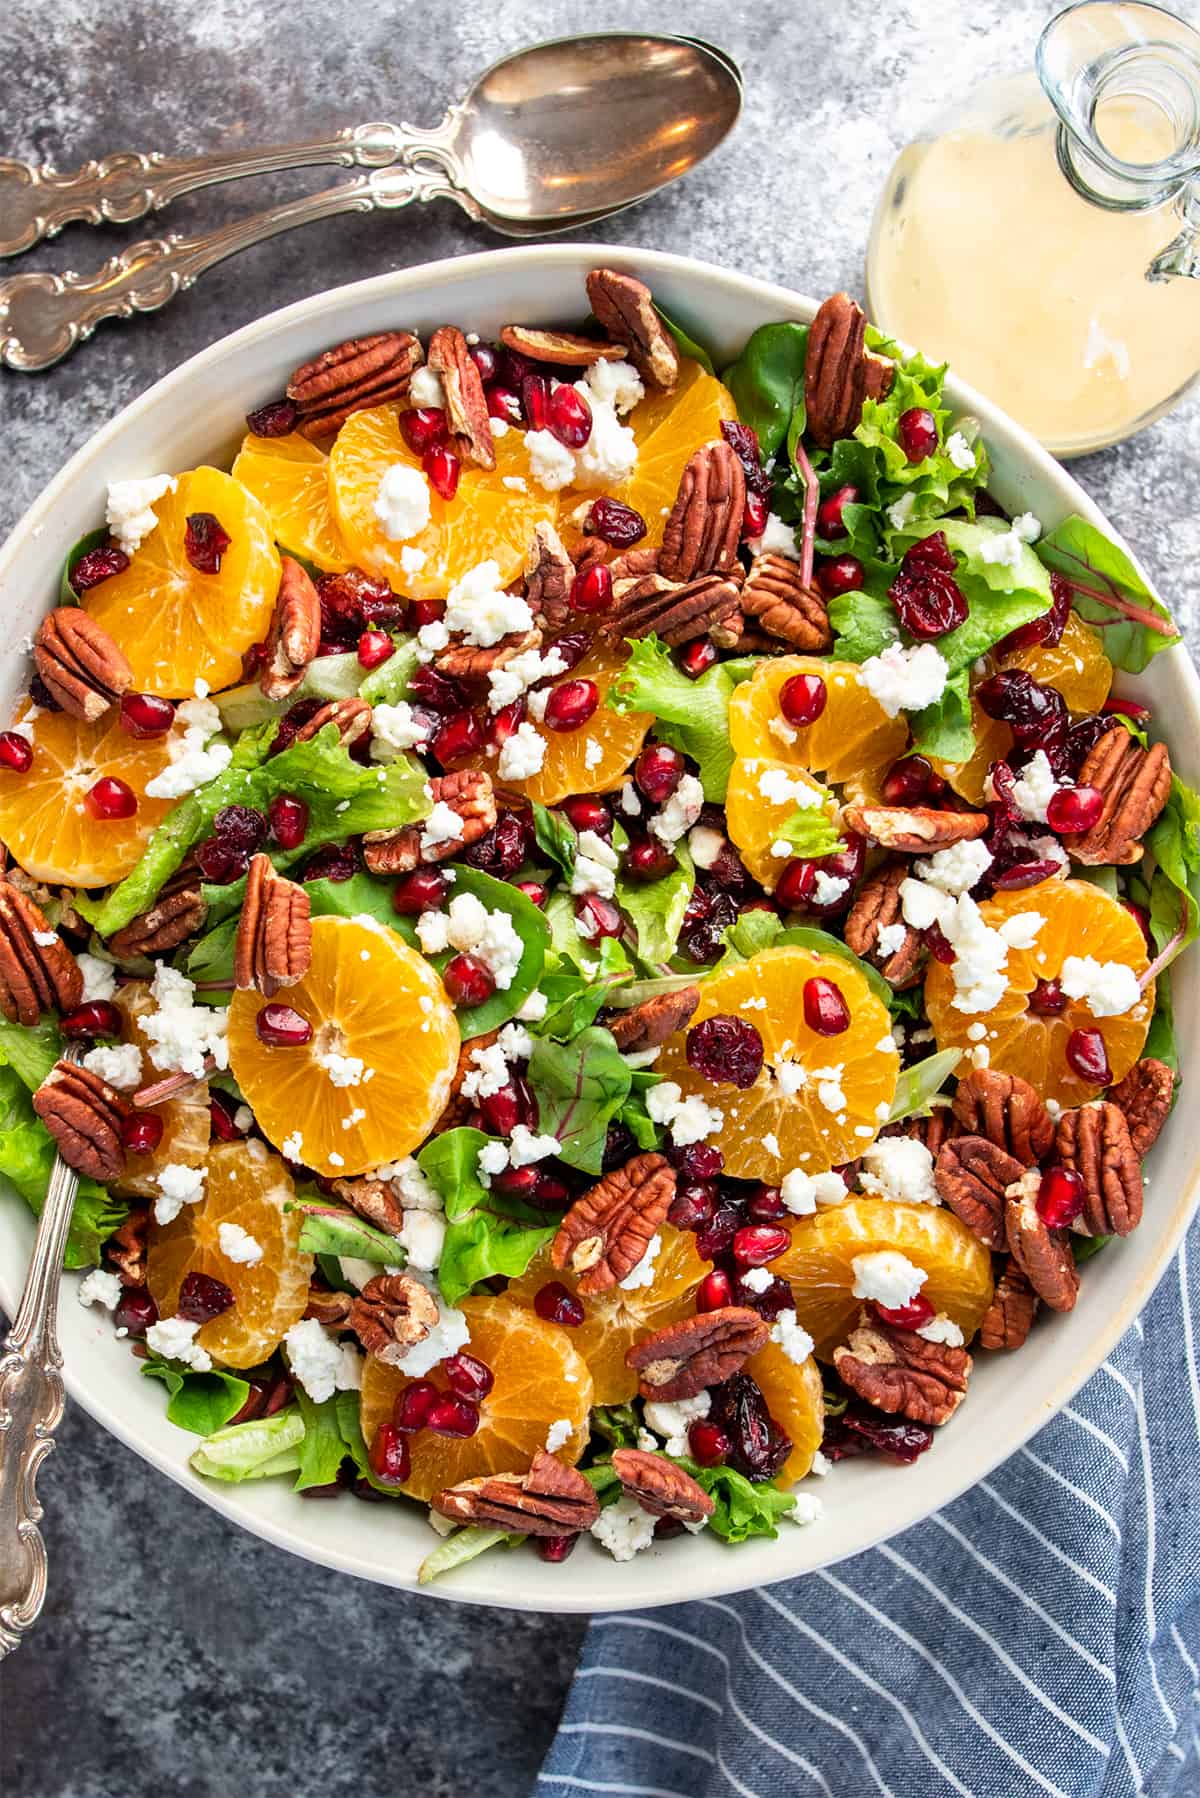 Overhead of Christmas salad with pomegranate arils, orange slices, cranberries, goat cheese, and pecans over a bed of lettuce.